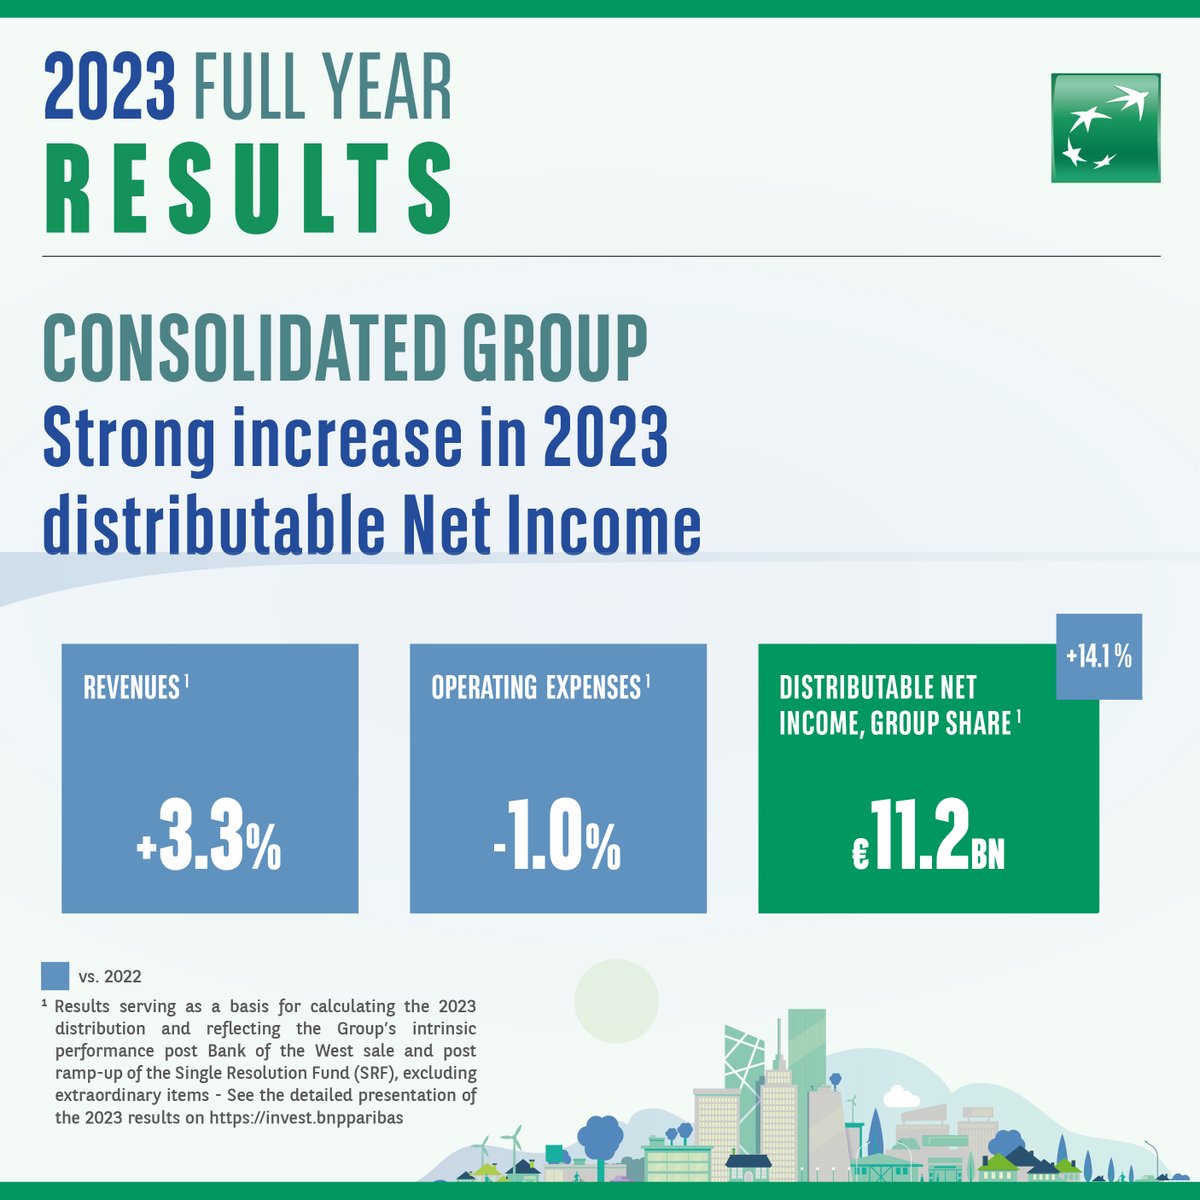 #BNPPResults BNP Paribas’ diversified and integrated model and its ability to accompany clients and the economy in a comprehensive way by mobilising its teams, resources and capabilities, continued to drive growth in activity and results in 2023. bnpp.lk/4Q23